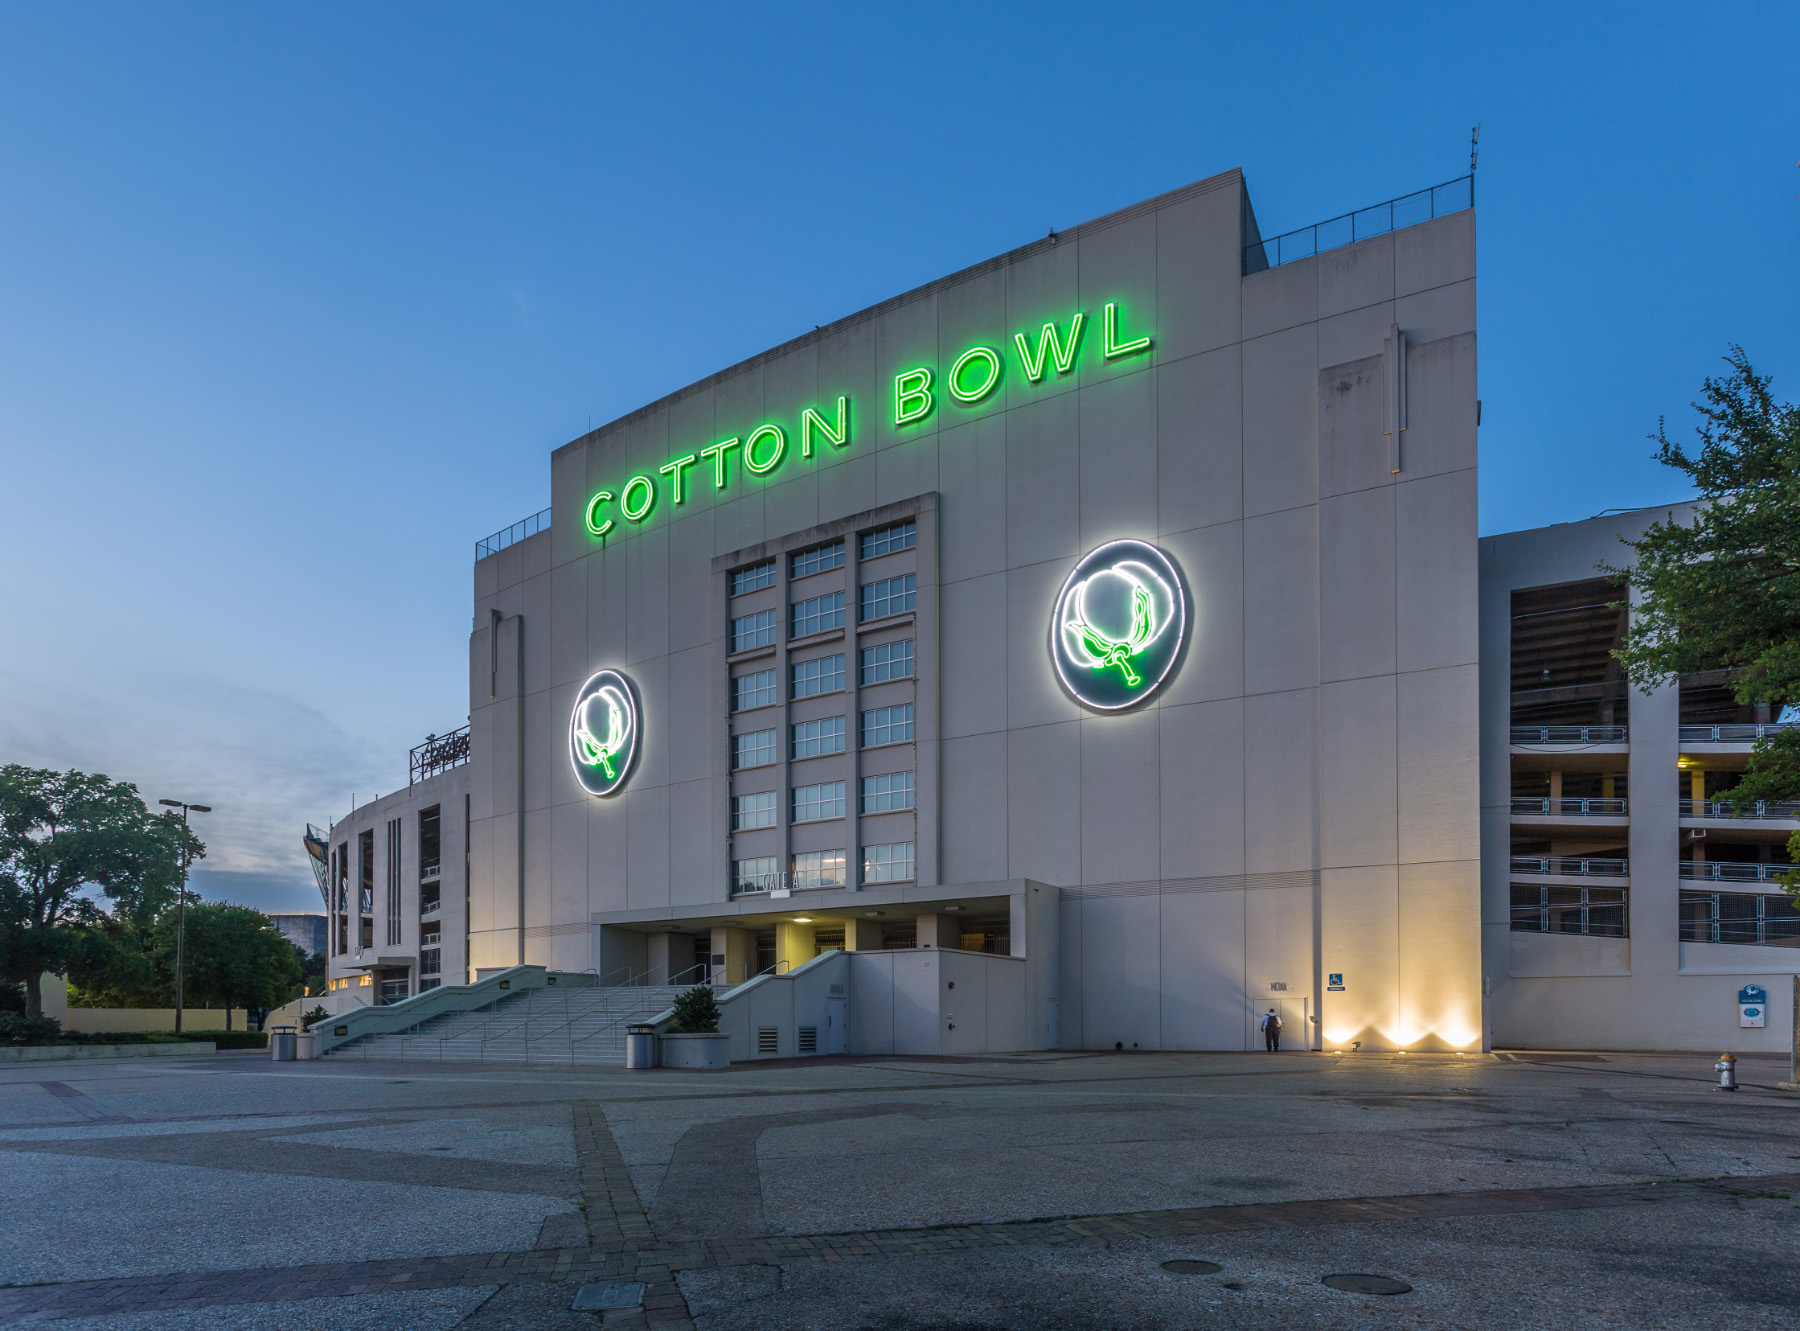 The exterior of the Cotton Bowl stadium, which opened in 1932 as a 46,000-seat venue known as Fair Park Stadium.